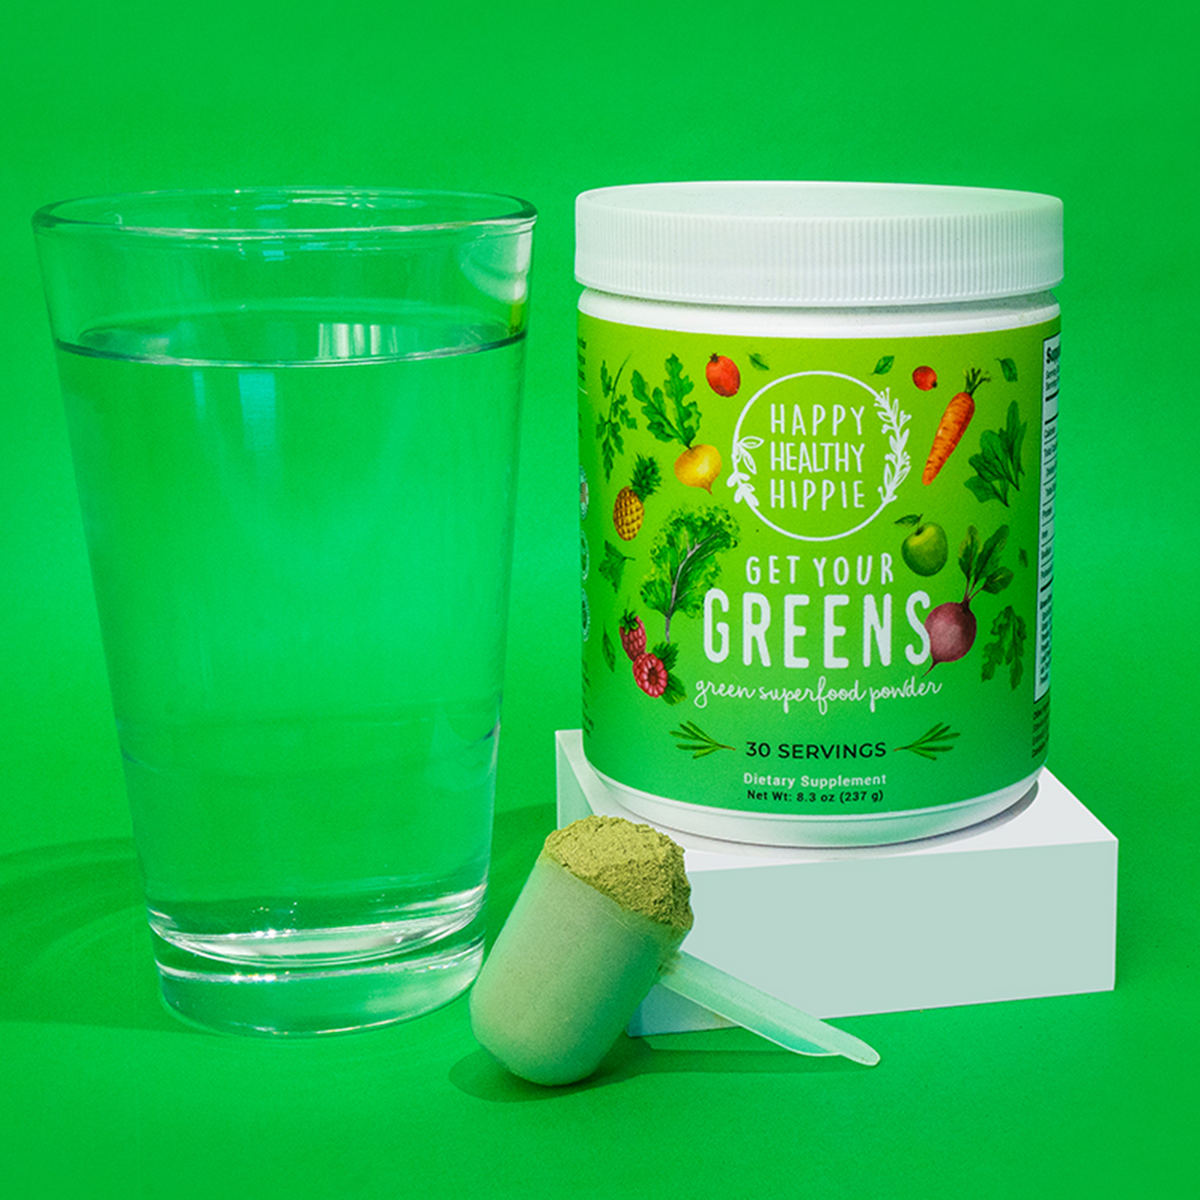 Get Your Greens - Superfood Greens Powder – Happy Healthy Hippie